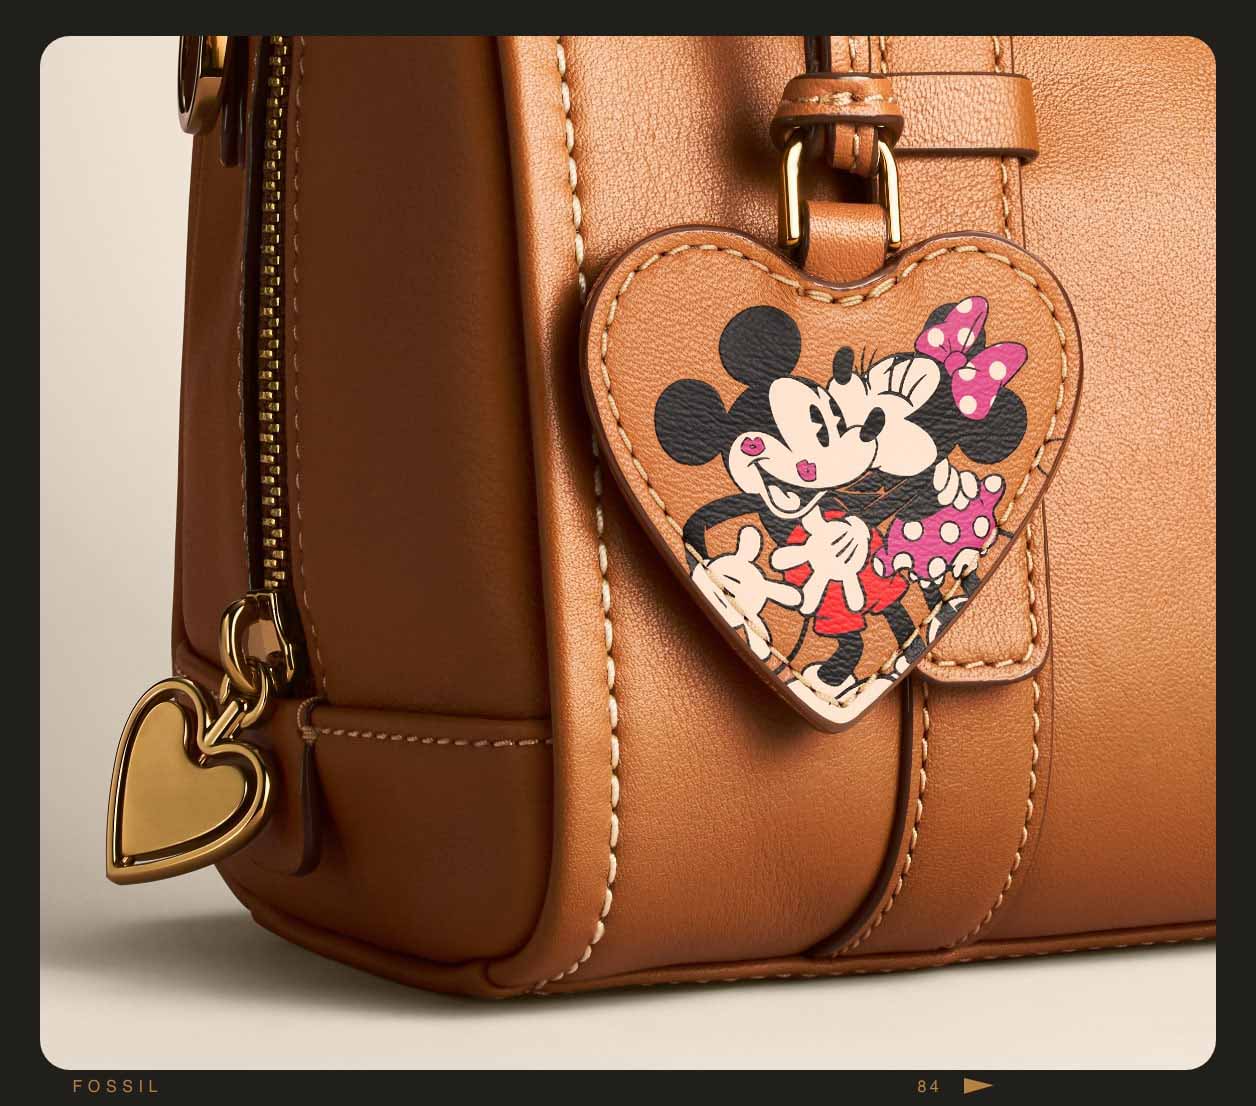 A close-up of the brown leather Carlie Mini satchel, showcasing the embossed Mickey Mouse and Minnie Mouse graphic.